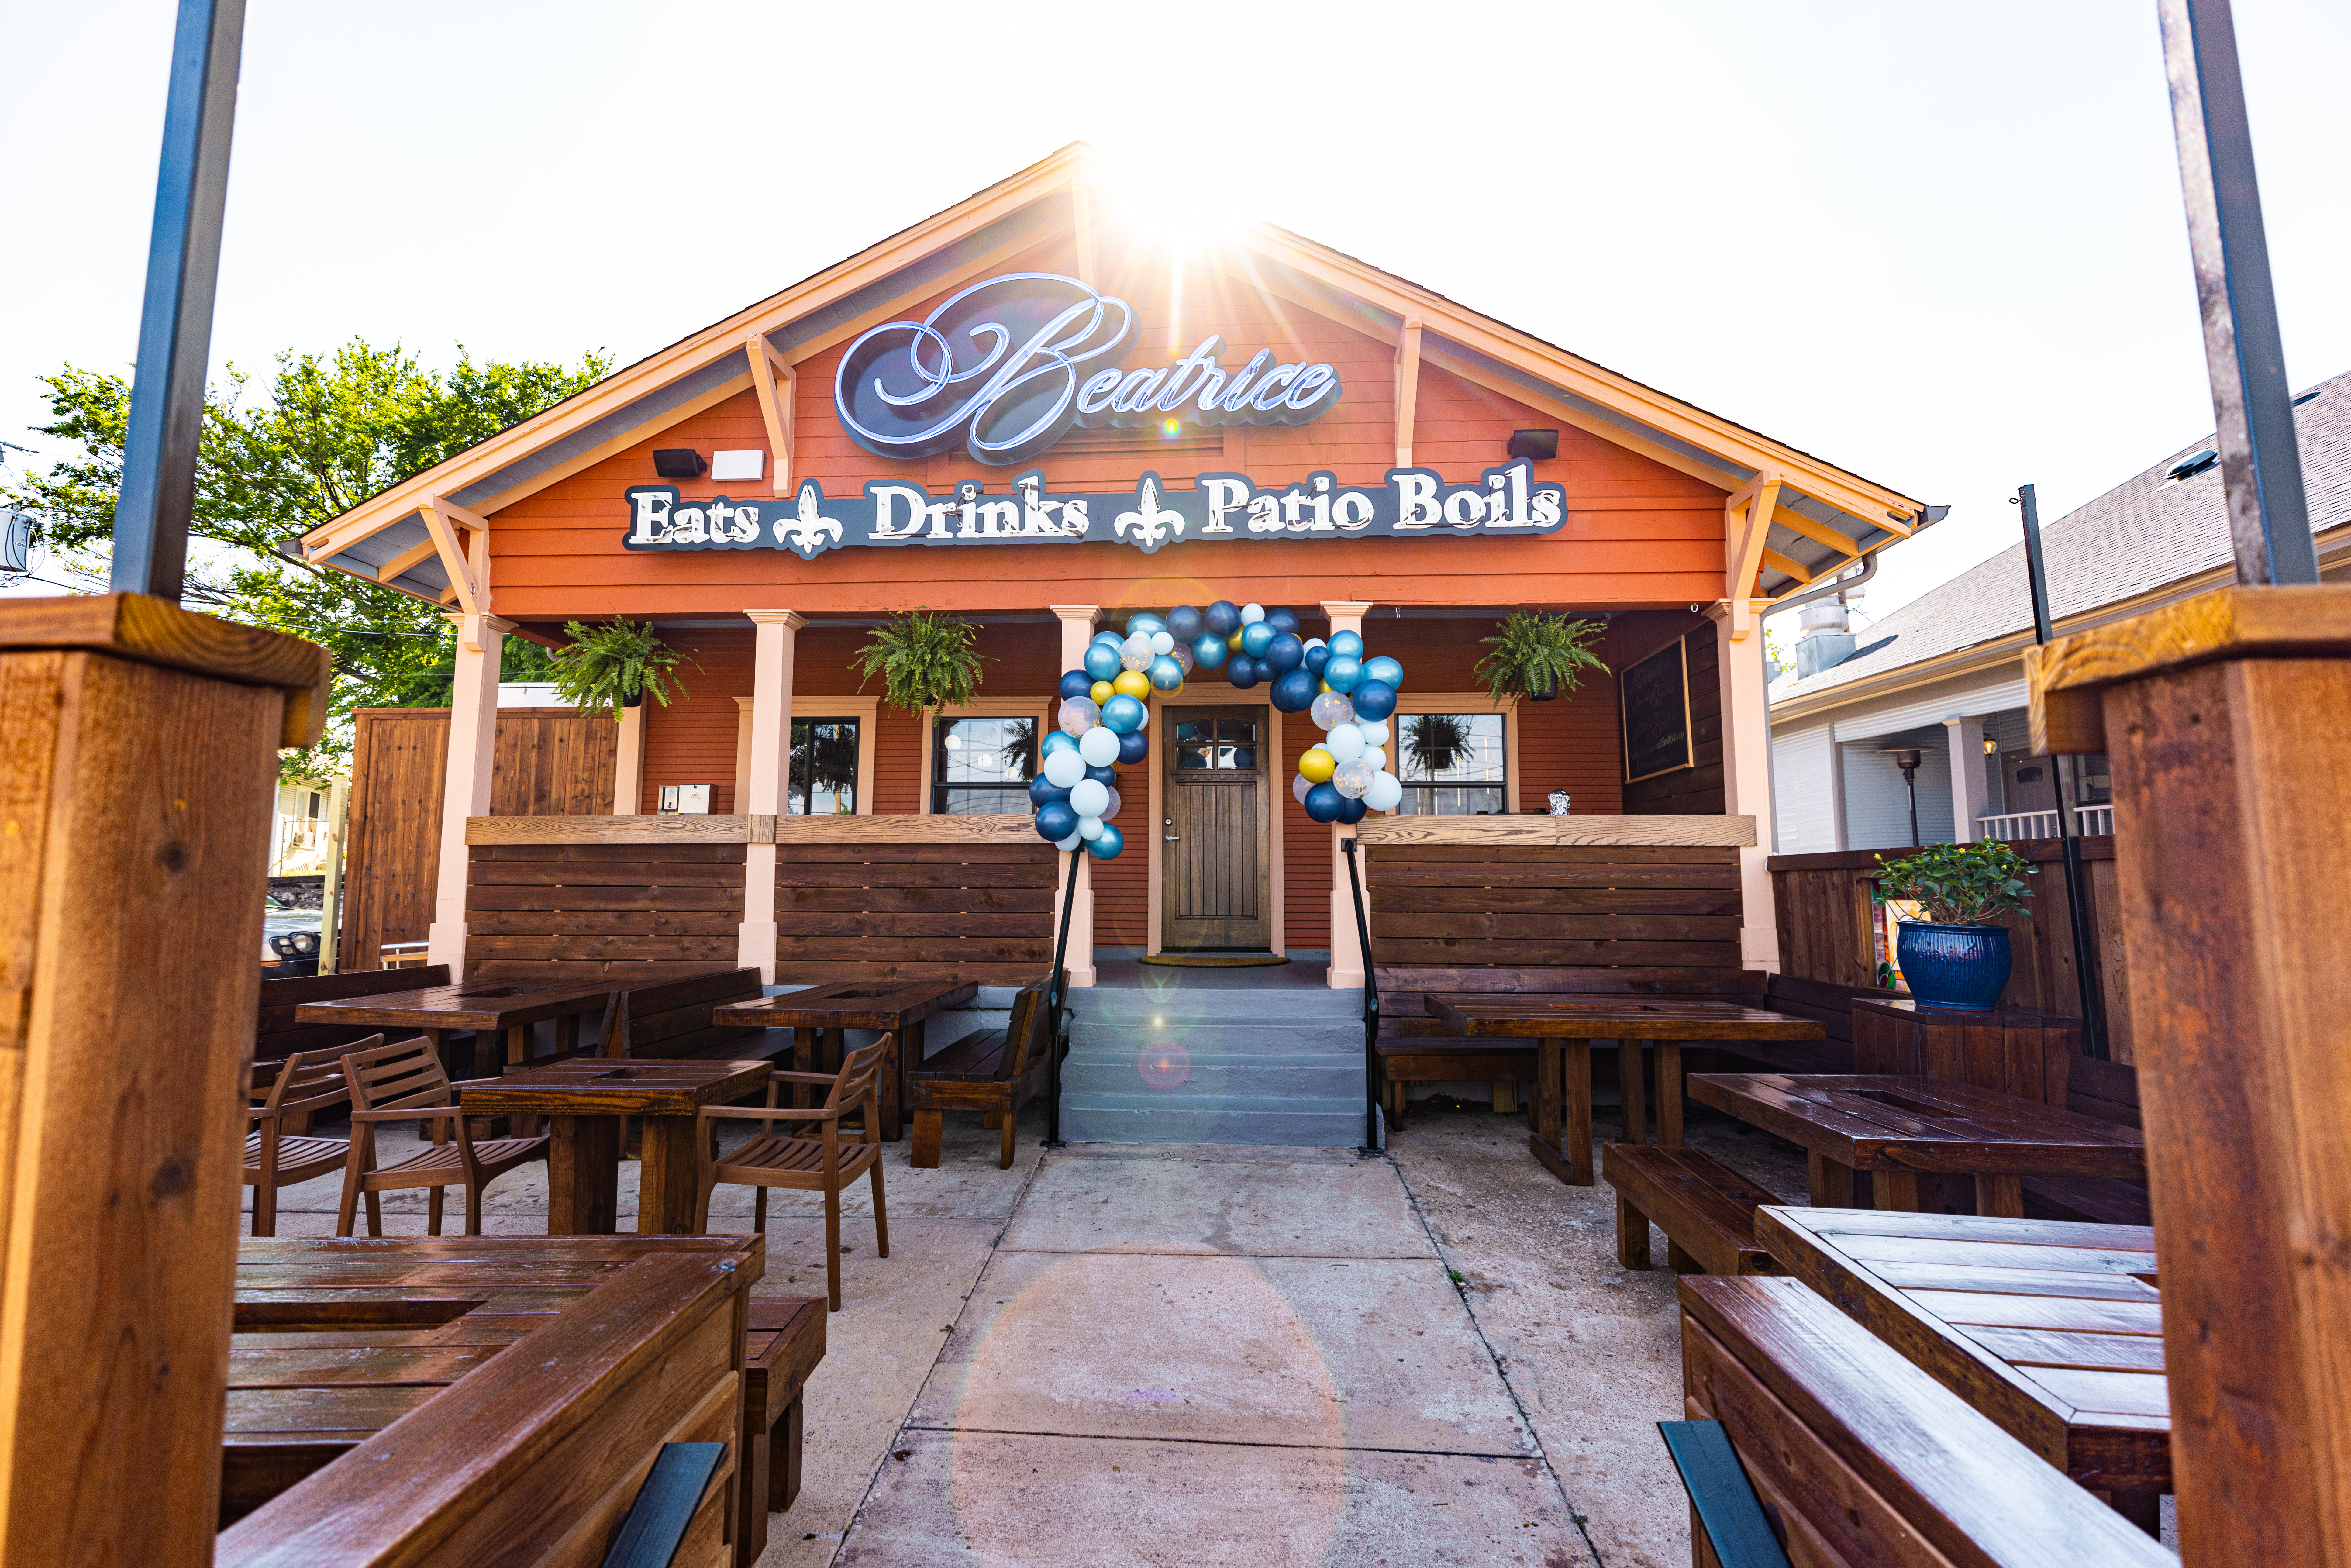 The orange clapboard exterior of Restaurant Beatrice looks like a refurbished home. The sign is white with blue outline and reads: Beatrice. Eats. Drinks. Patio Boils.